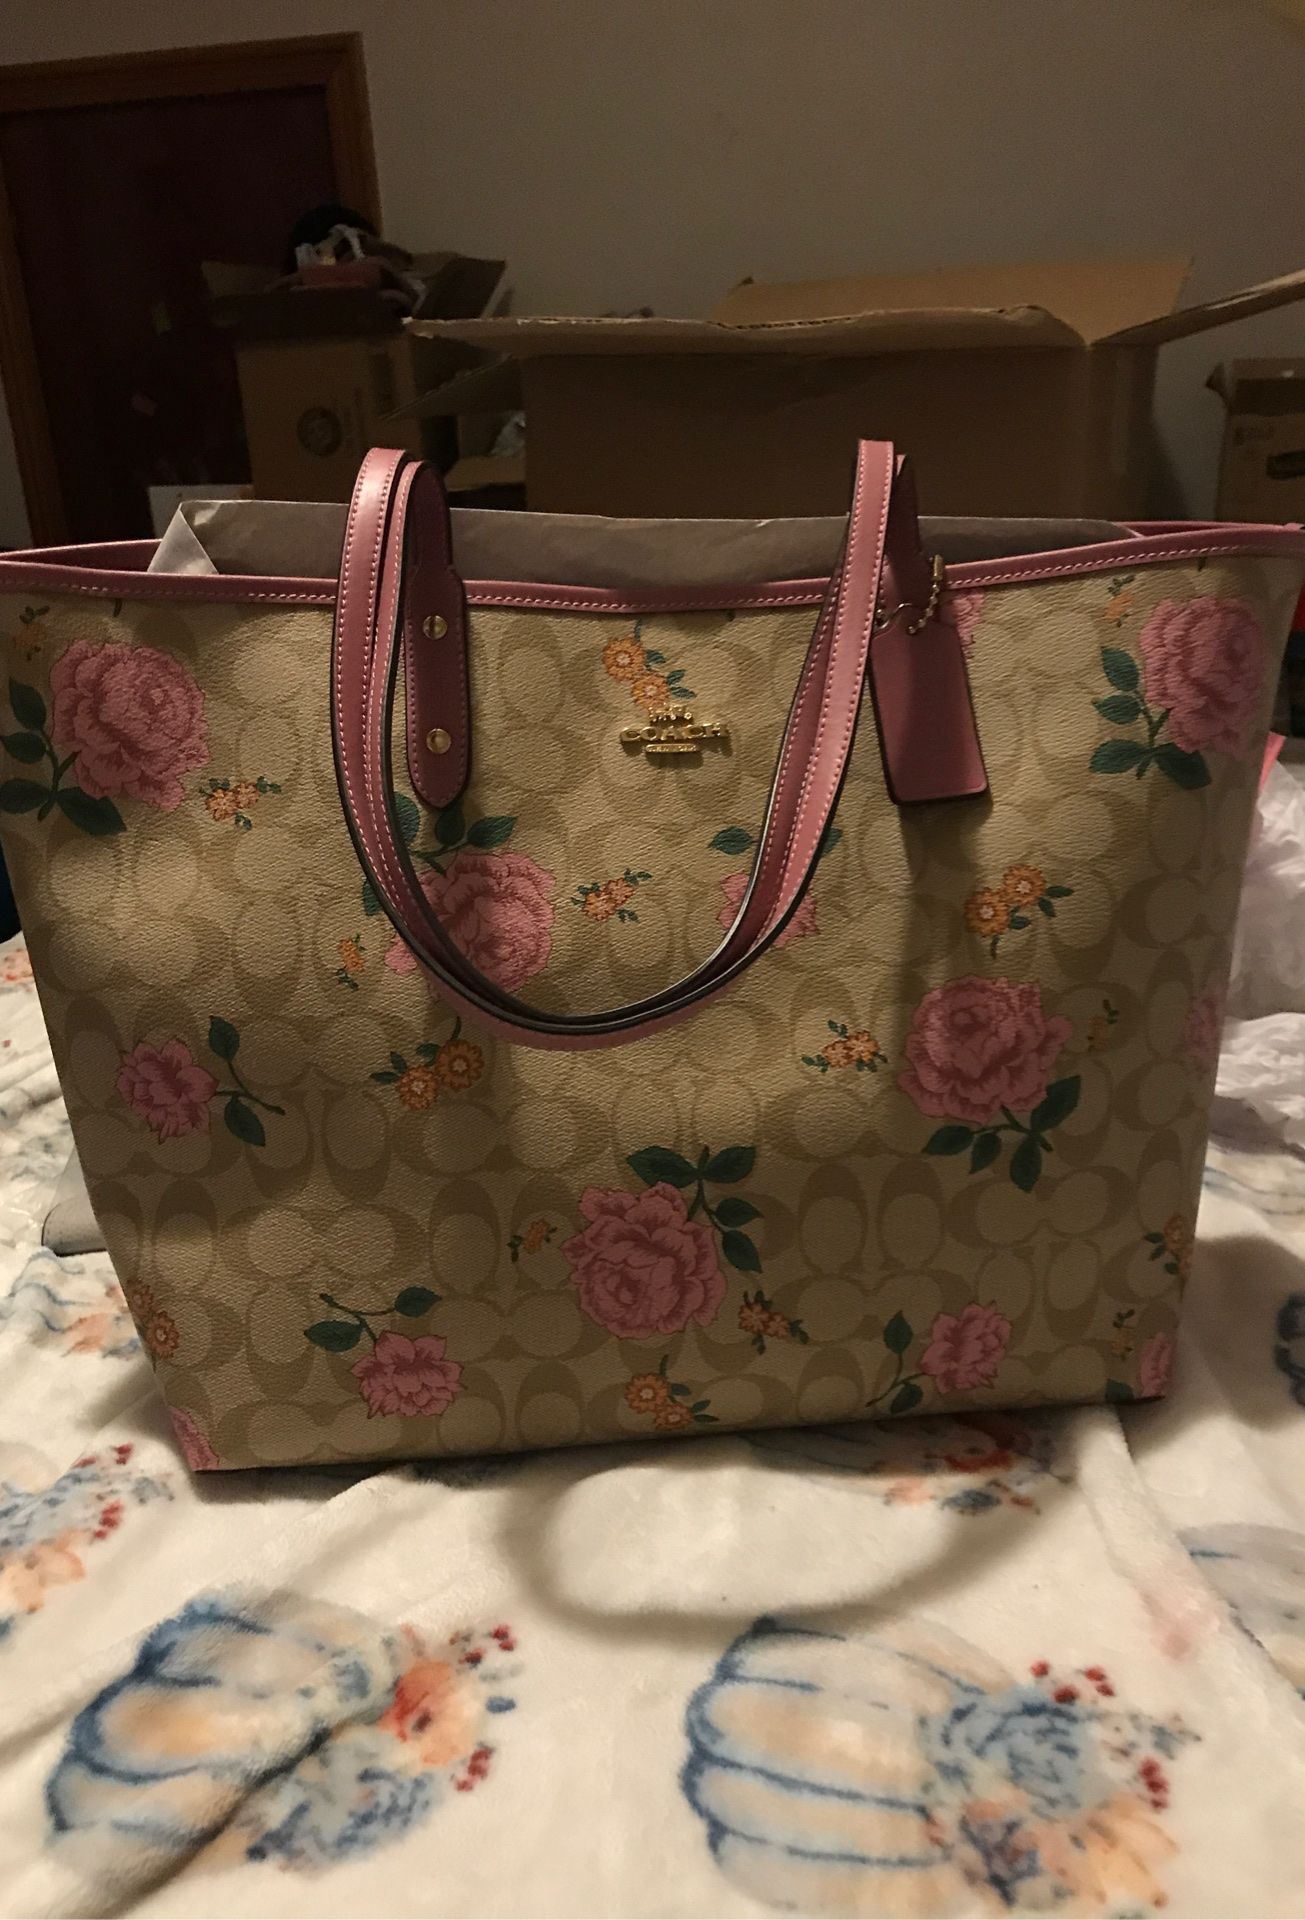 Flower coach tote 🌺 🌸